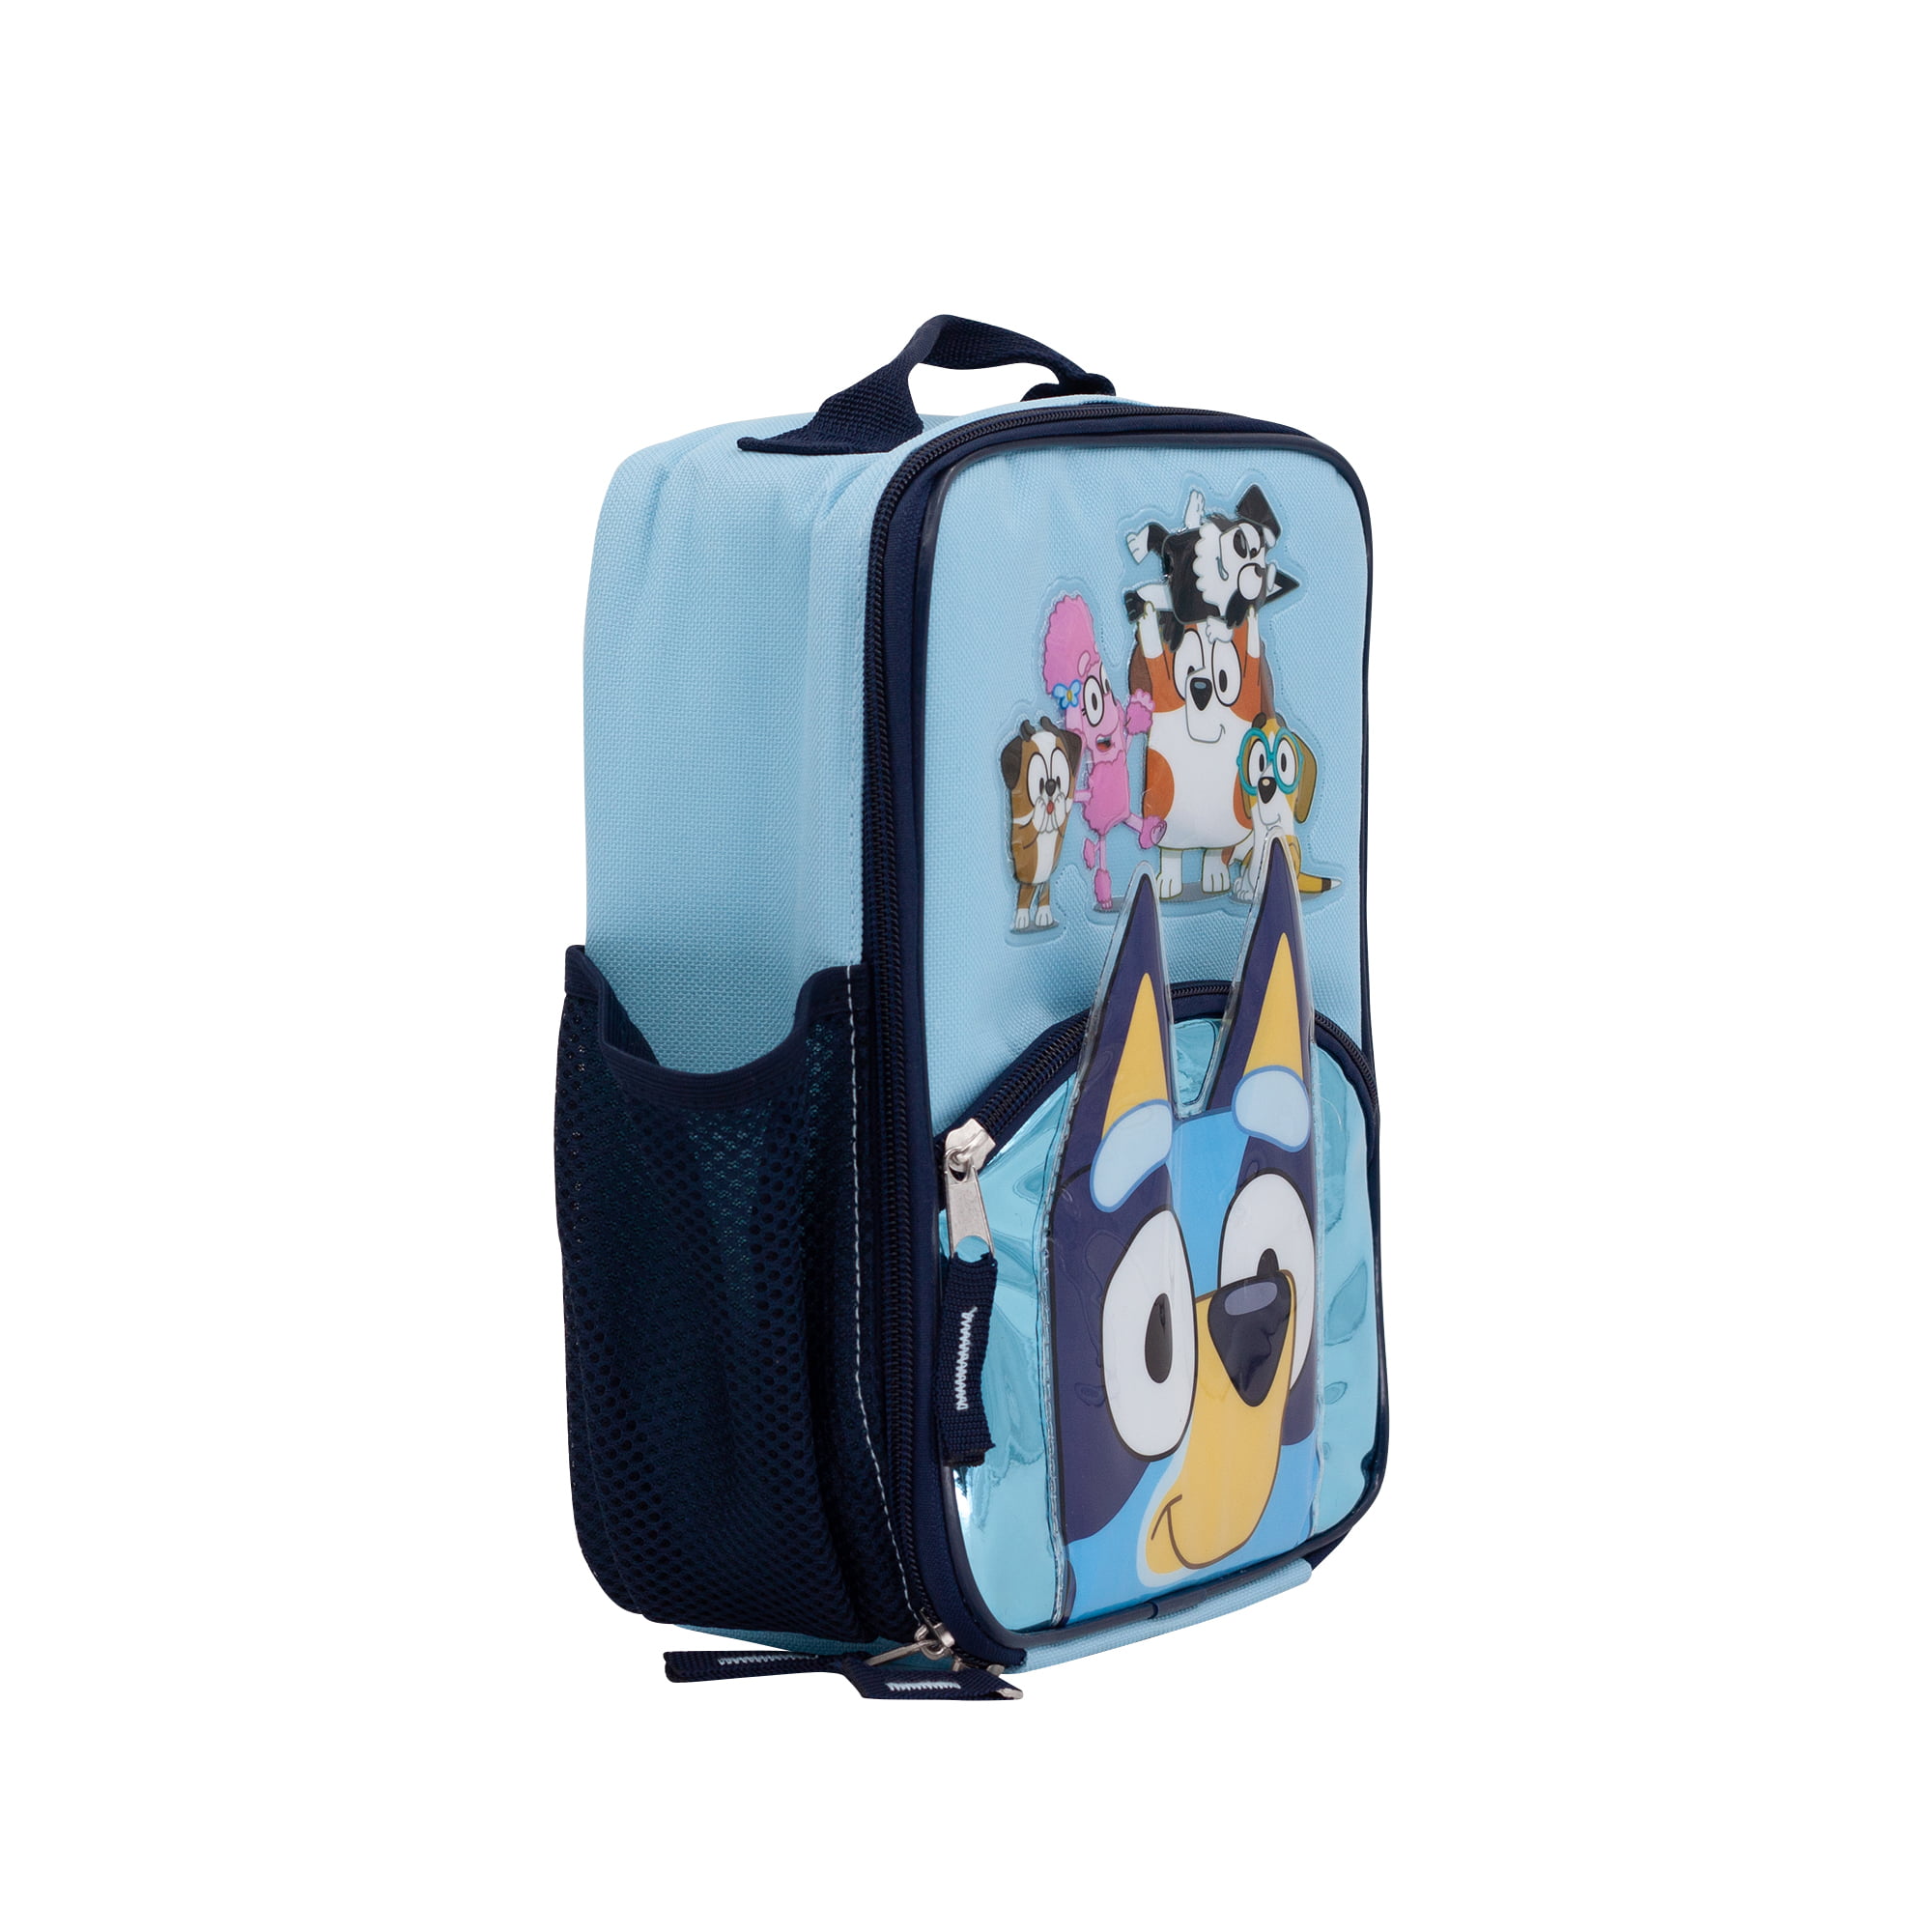 Bluey Fun Friends Lunch Tote by Accessory Innovations, BPA Free